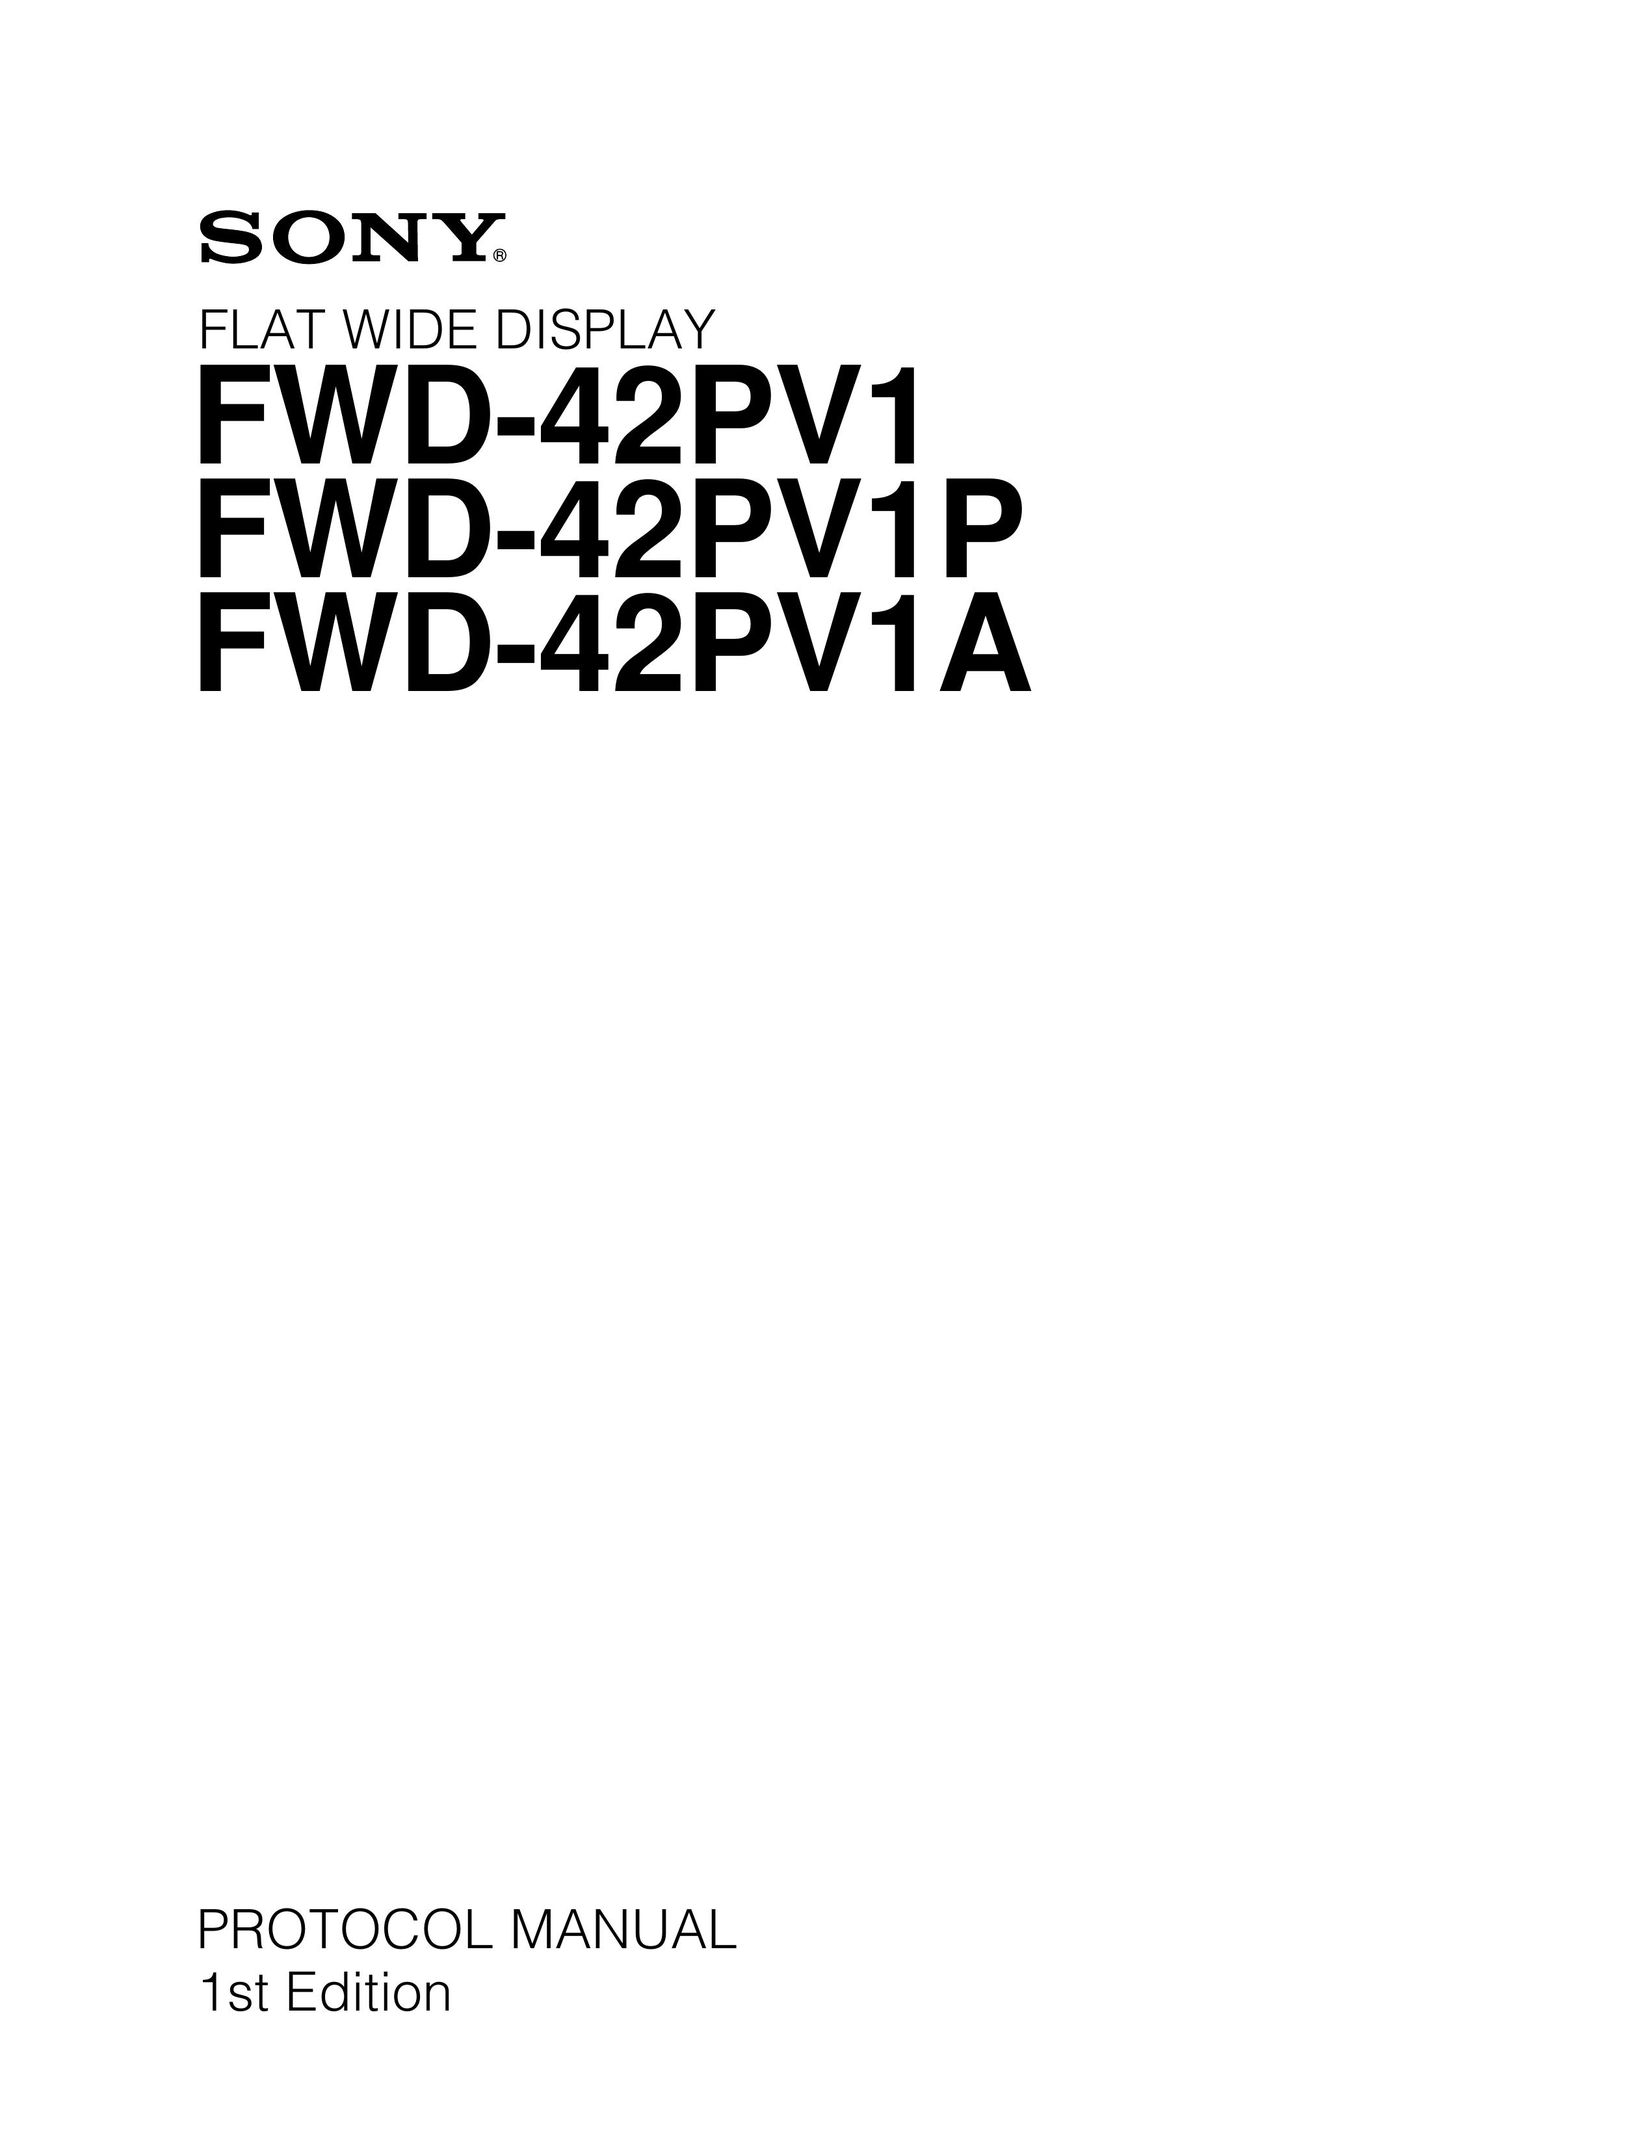 Sony FWD-42PV1A Home Theater Screen User Manual